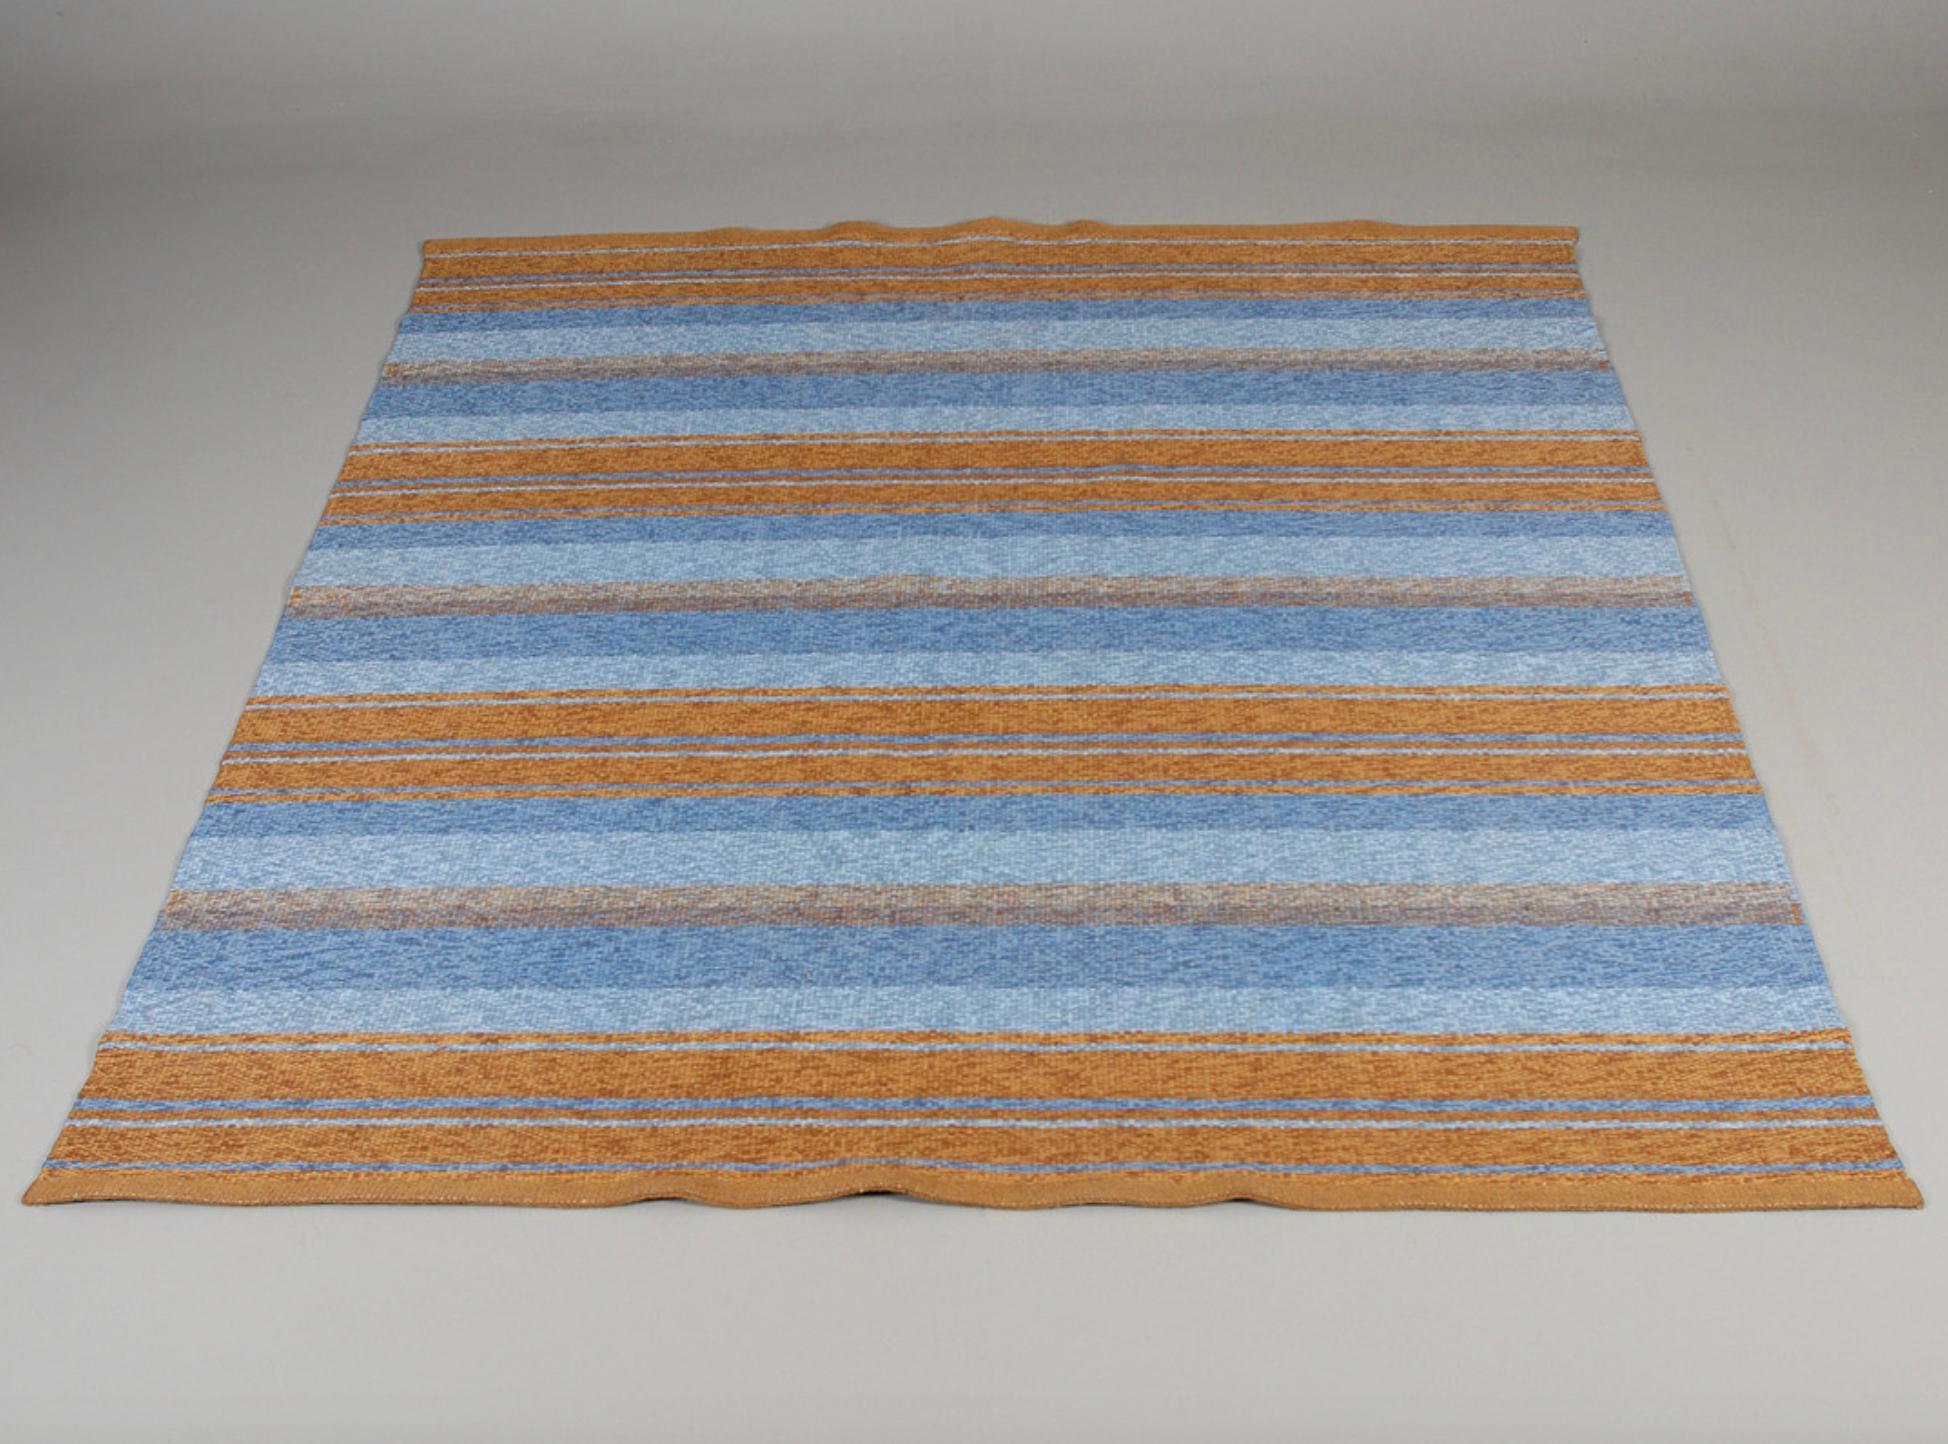 Late 20th century flat wave rug produced by Svangsta Mattvaveri AB, Sweden. Dimensions 6'7